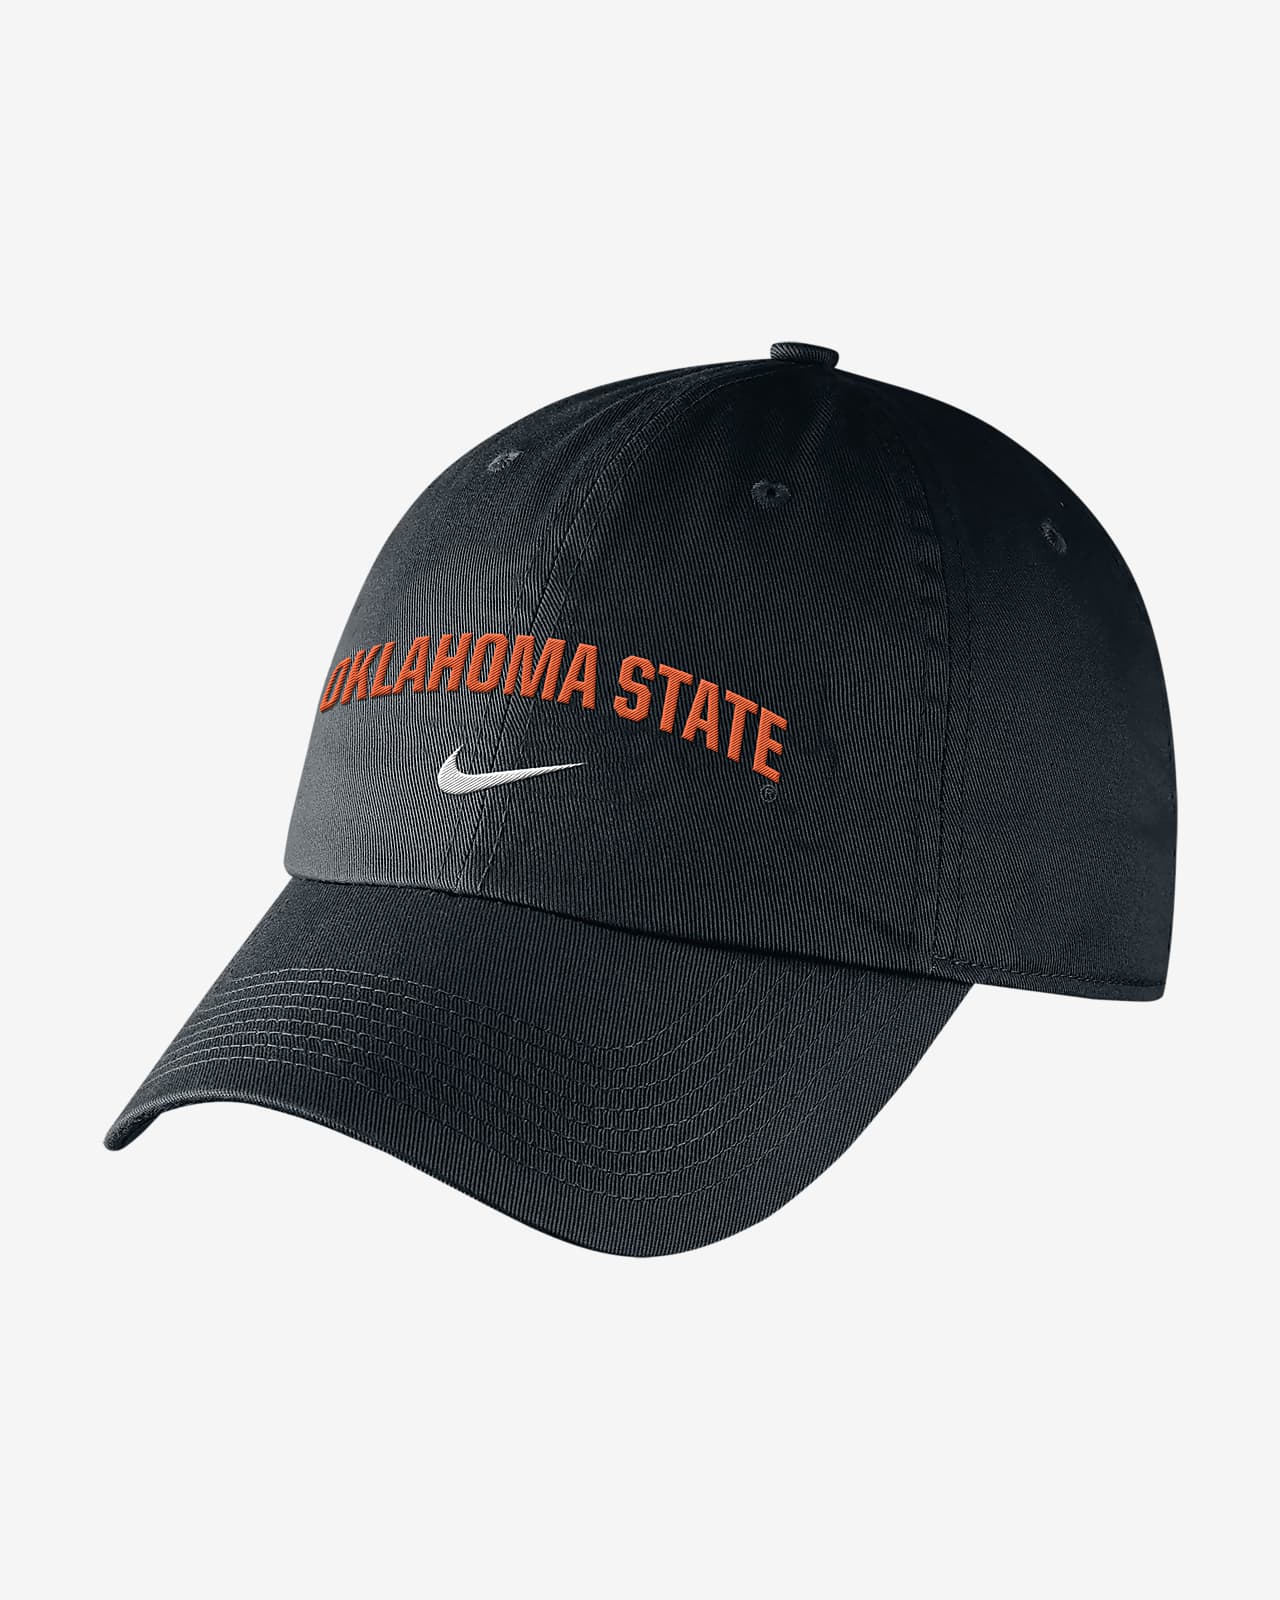 Nike College (Oklahoma State) Hat